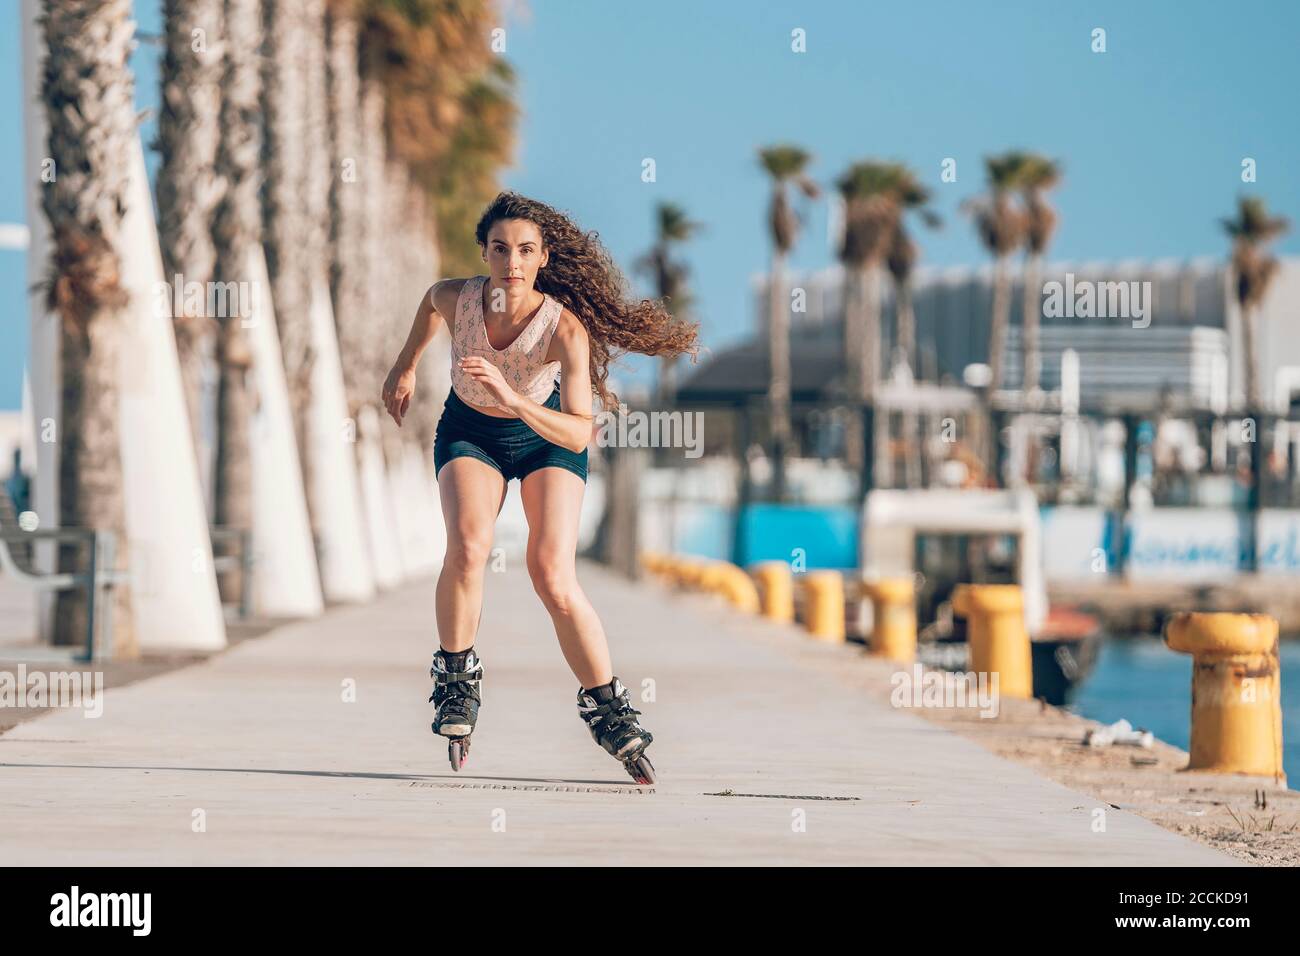 Young woman inline skating on promenade at the coast Stock Photo